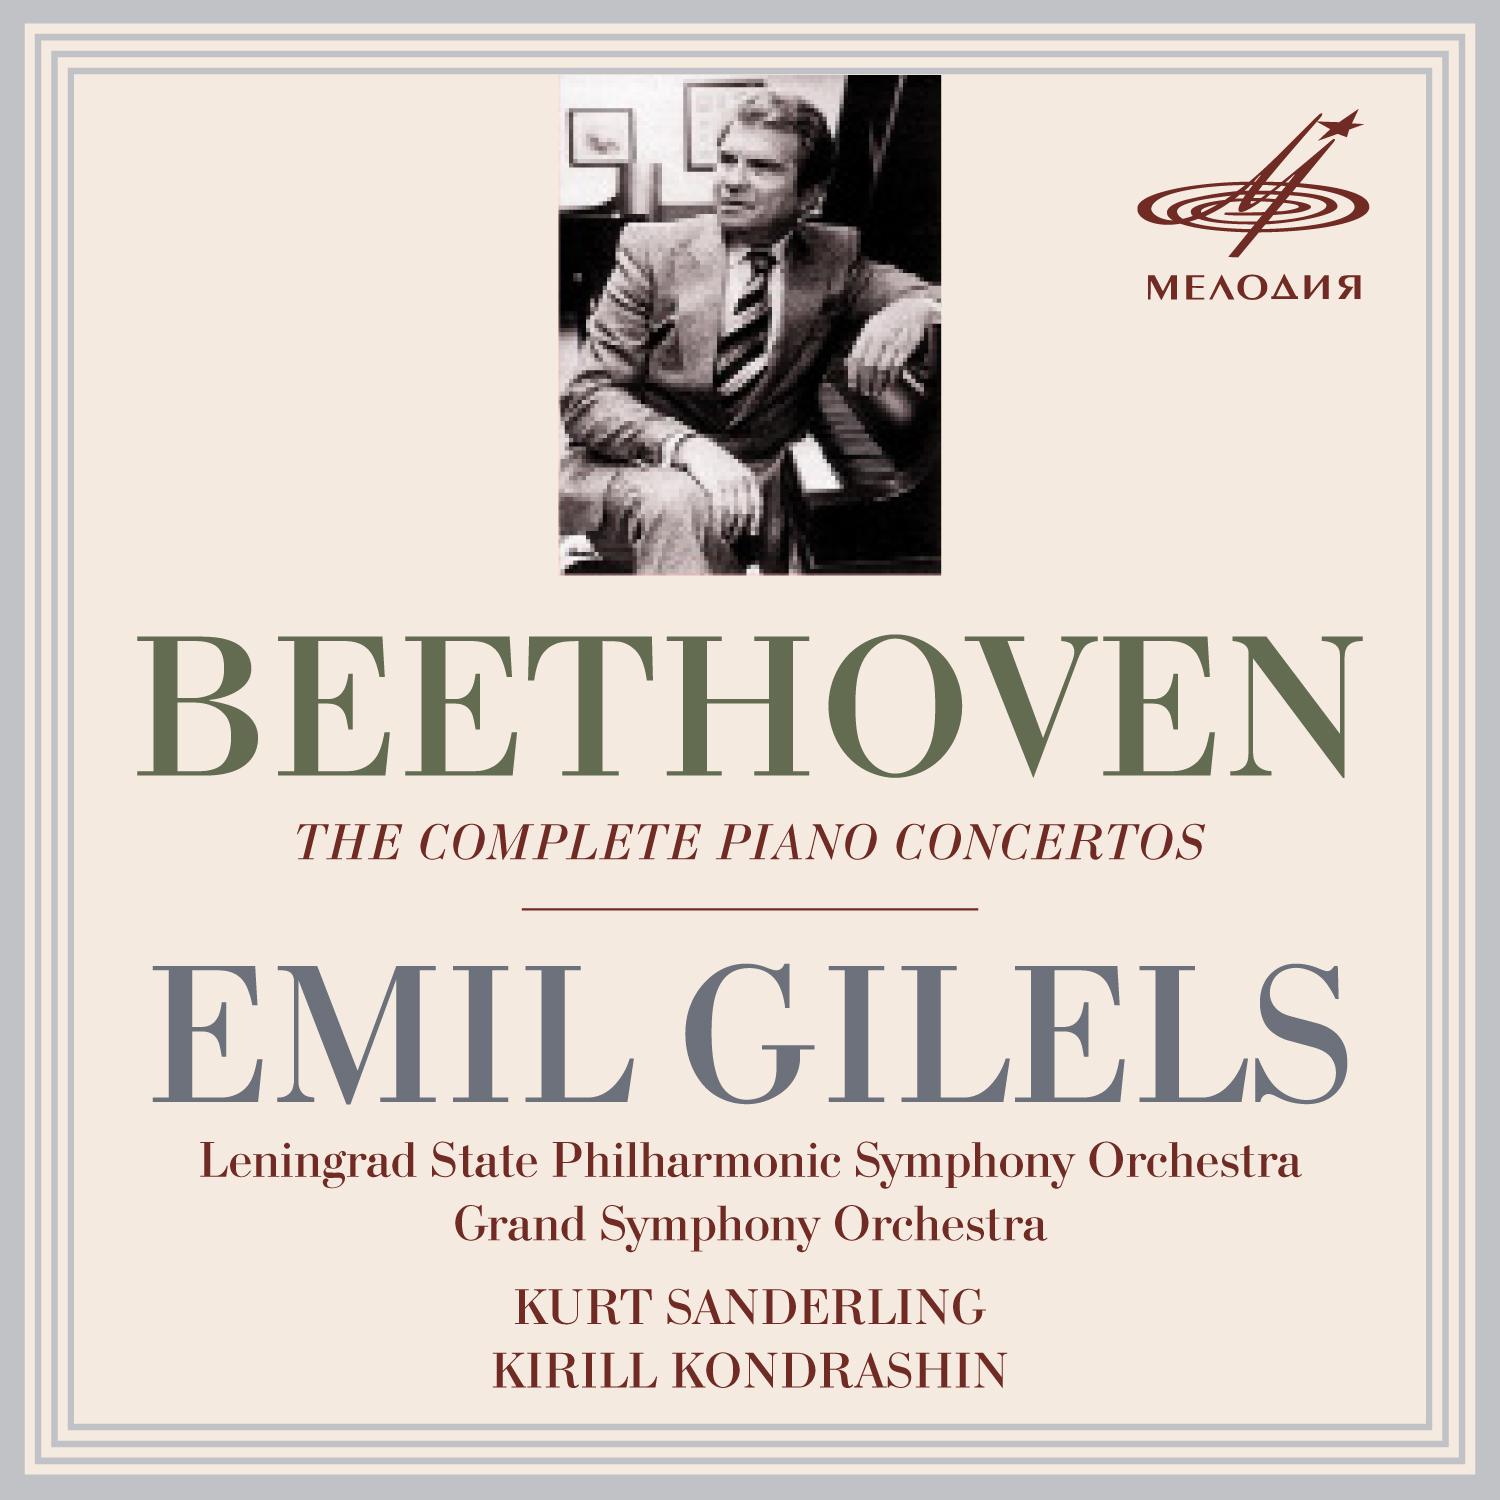 Emil Gilels - Concerto No. 5 in E-Flat Major for Piano and Orchestra, Op. 73: I. Allegro